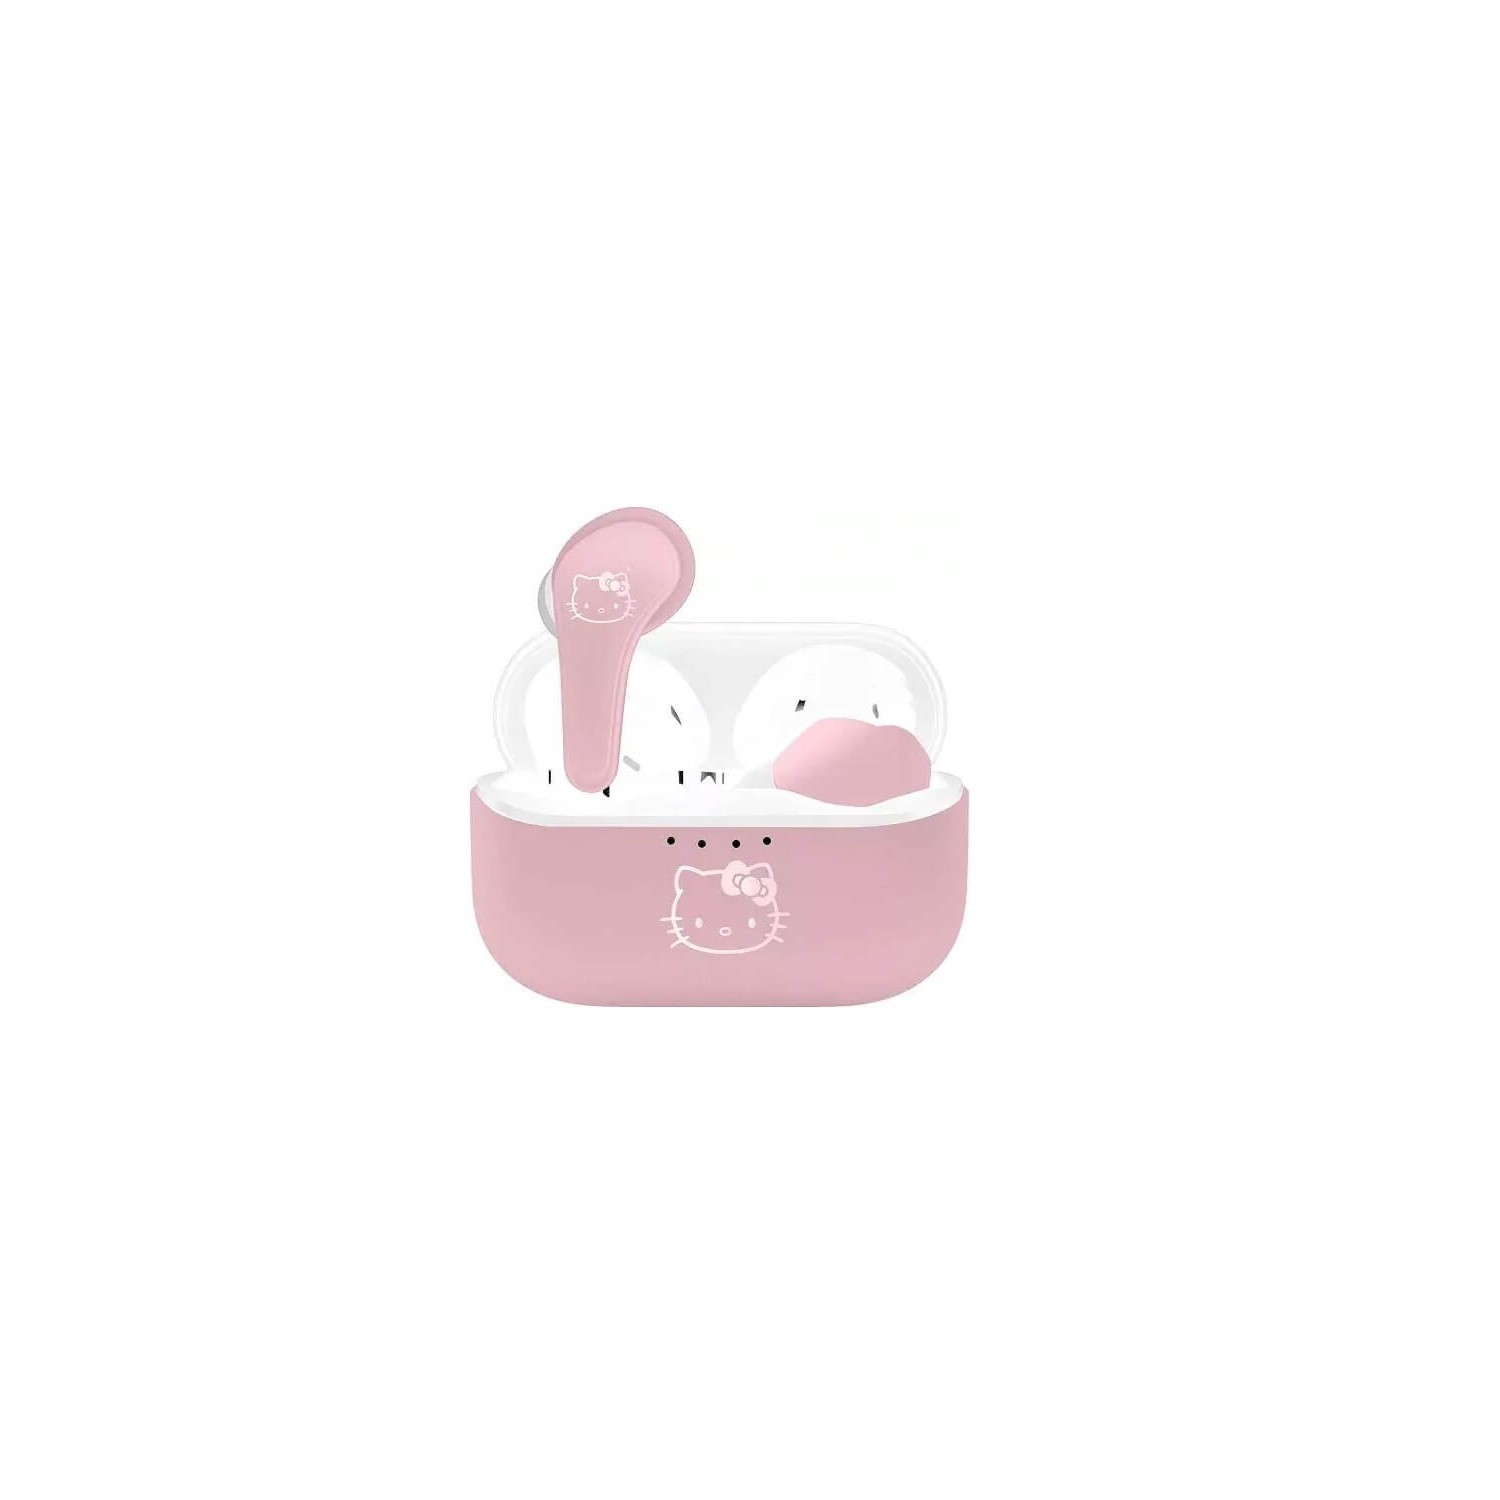 https://erikstore.com/49668-zoom_product/auriculares-inalambricos-earpods-hello-kitty.jpg